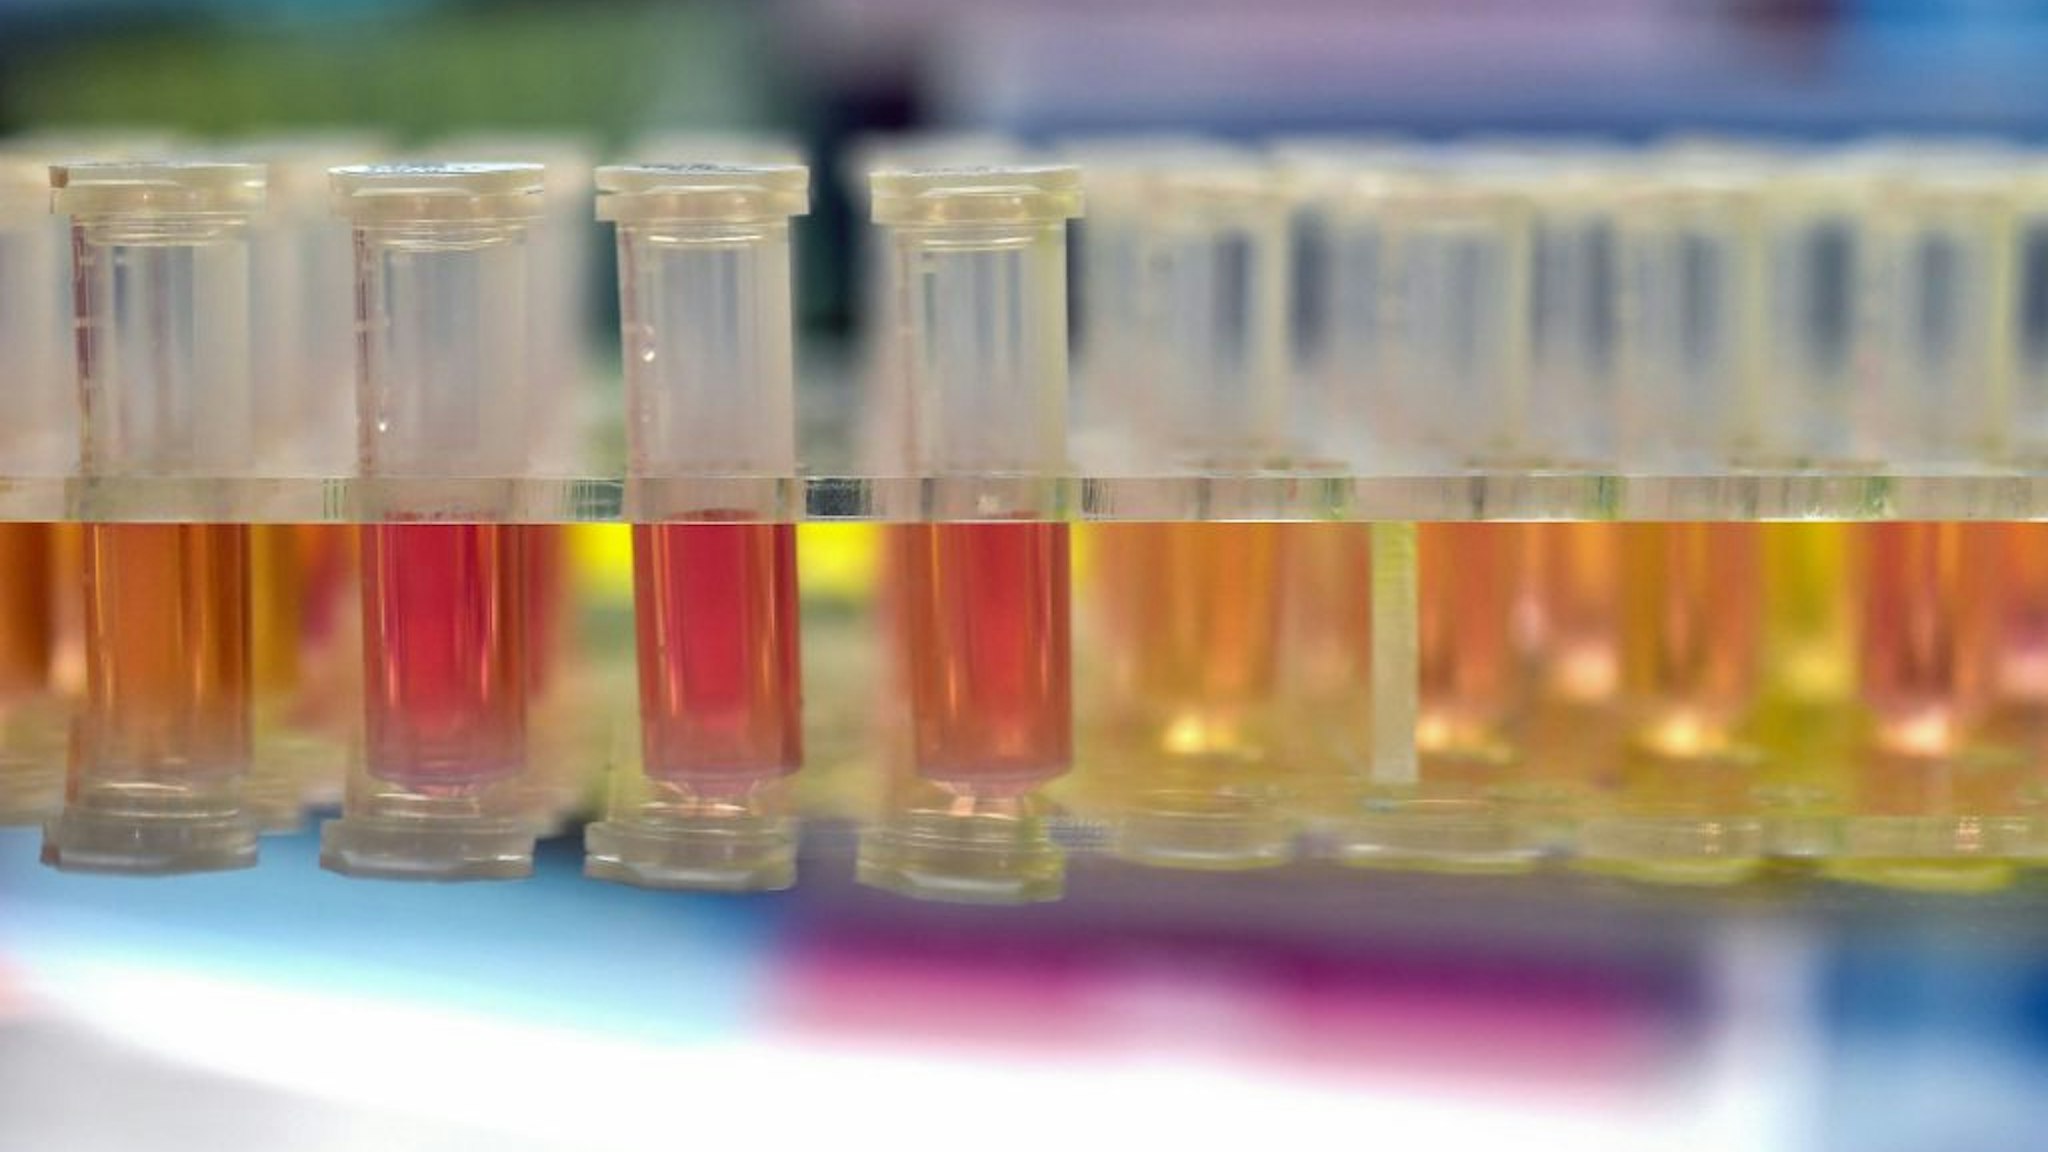 samples from people to be tested for the new coronavirus at "Fire Eye" laboratory in Wuhan